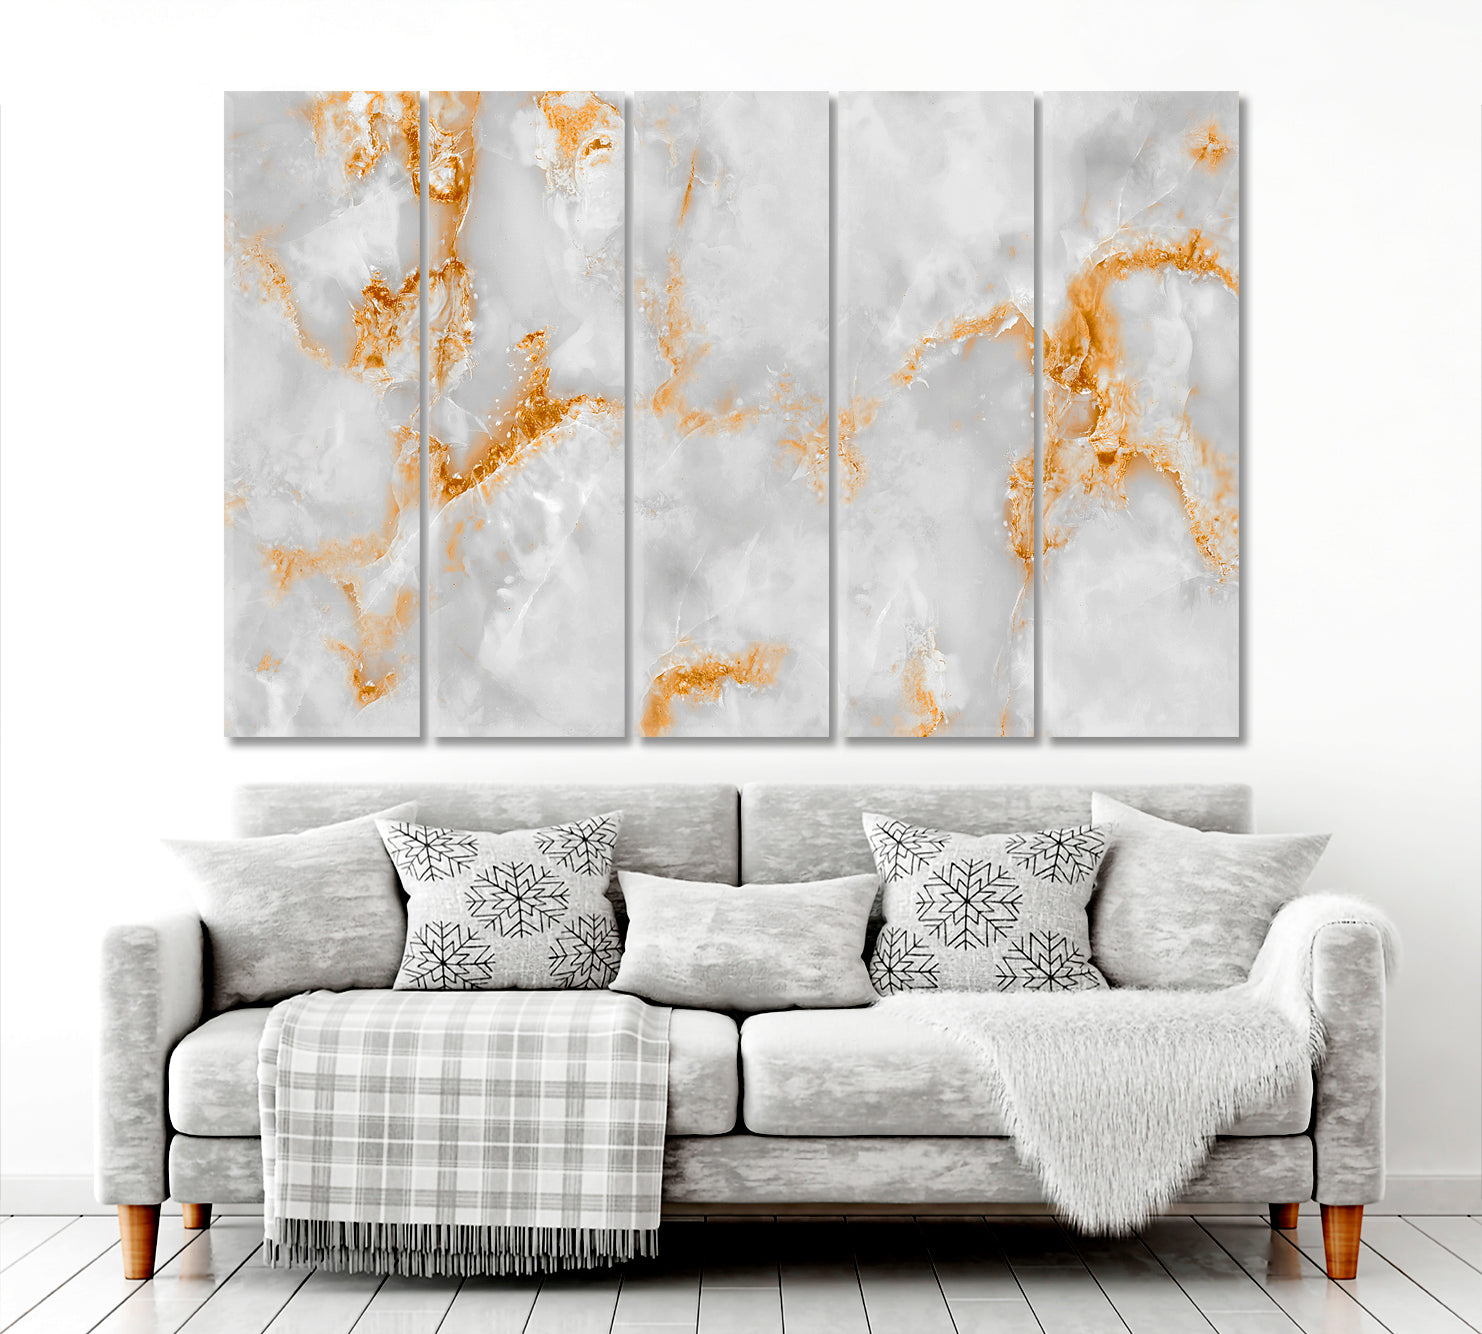 White Marble With Golden Veins Poster Fluid Art, Oriental Marbling Canvas Print Artesty 5 panels 36" x 24" 